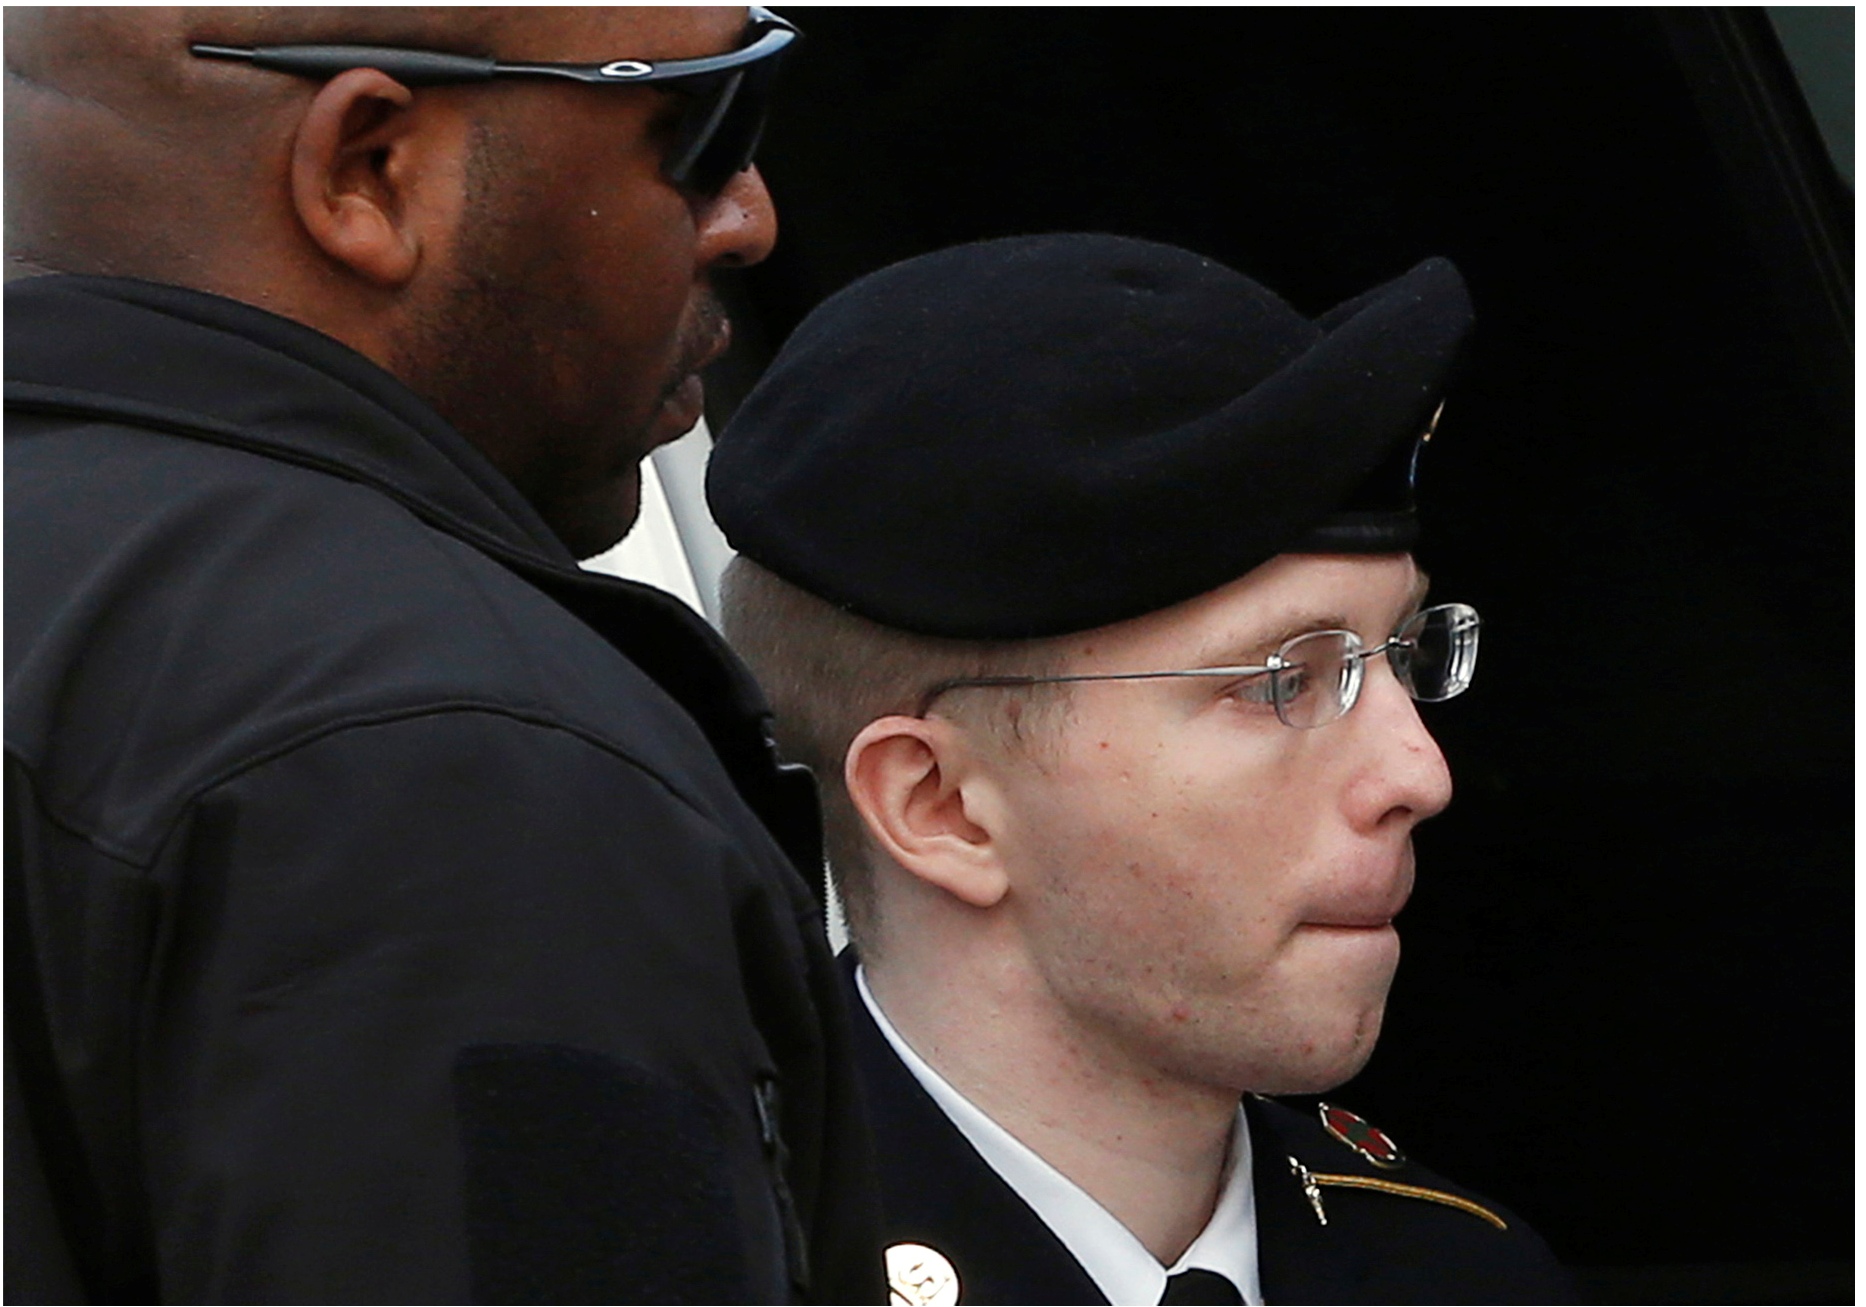 WikiLeaks source Manning sentenced to 35 years